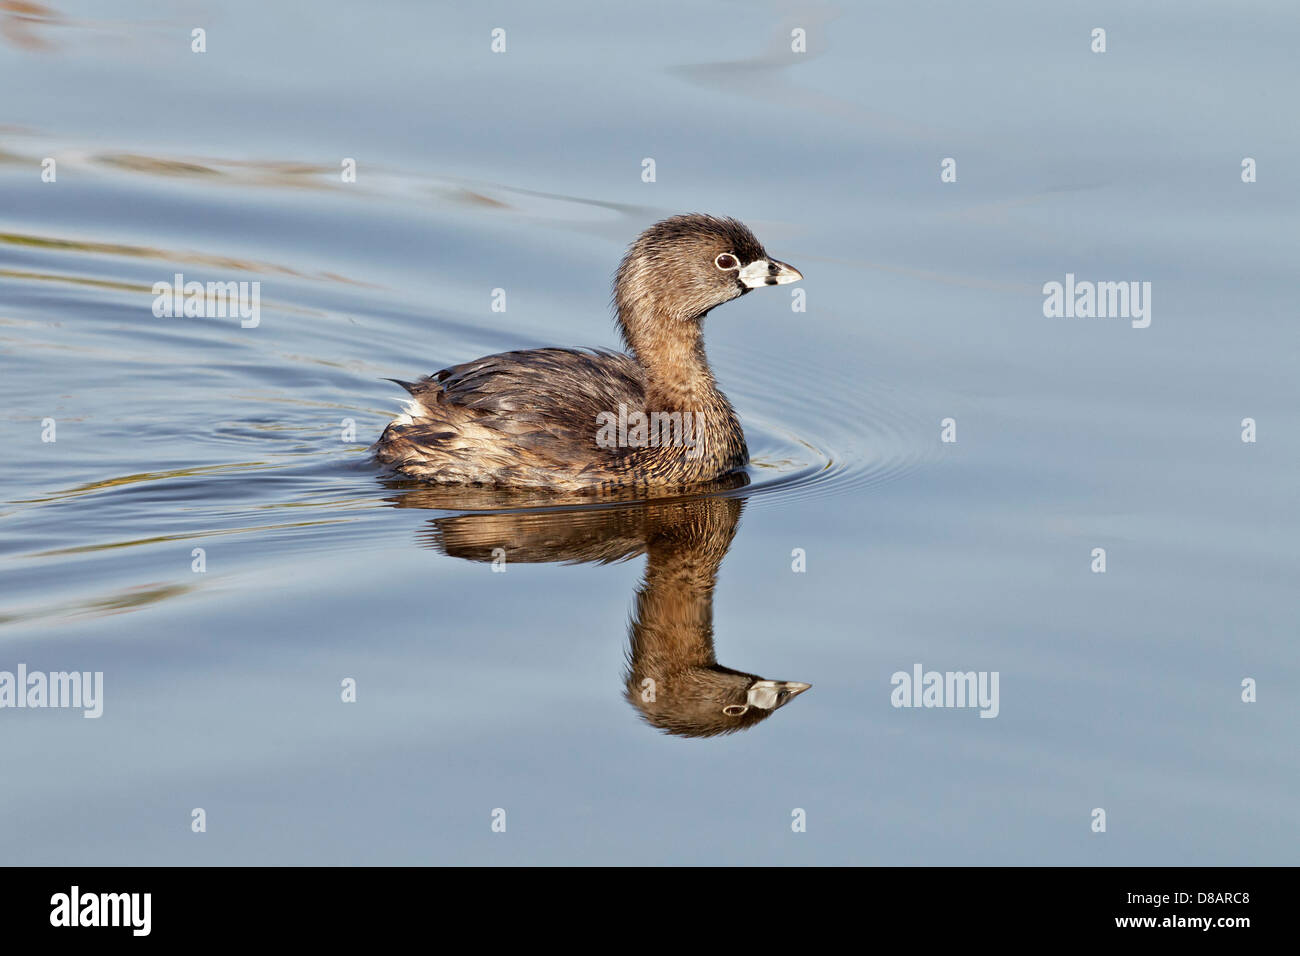 An adult Pied billed Grebe swimming on an inland lake Stock Photo